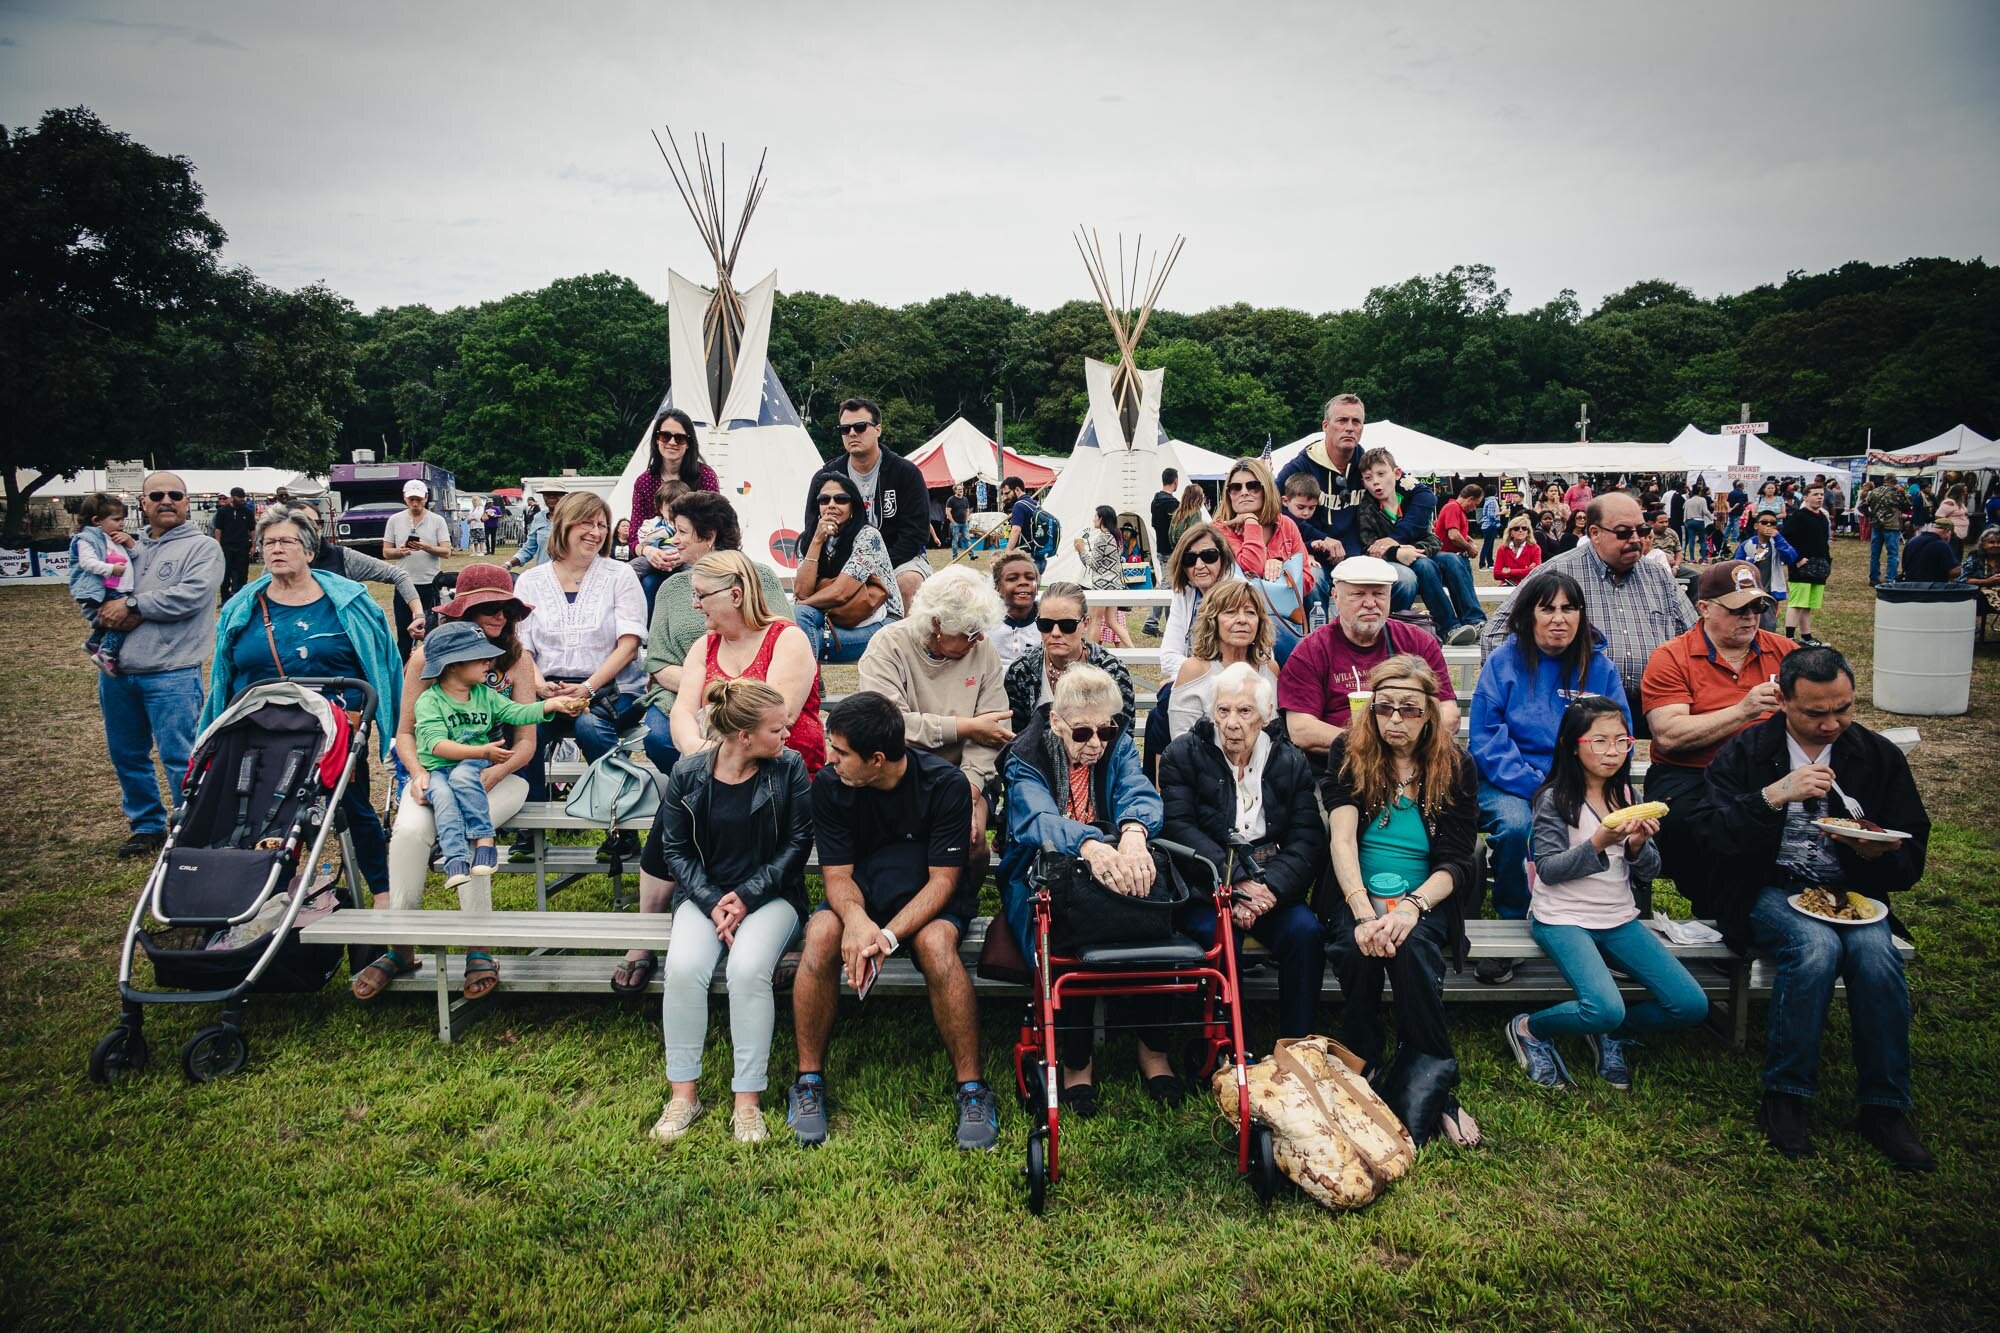  pow wow gathering at Shinnecock Indian Nation reservation off Southampton NY. photos by Stefano Giovannini 